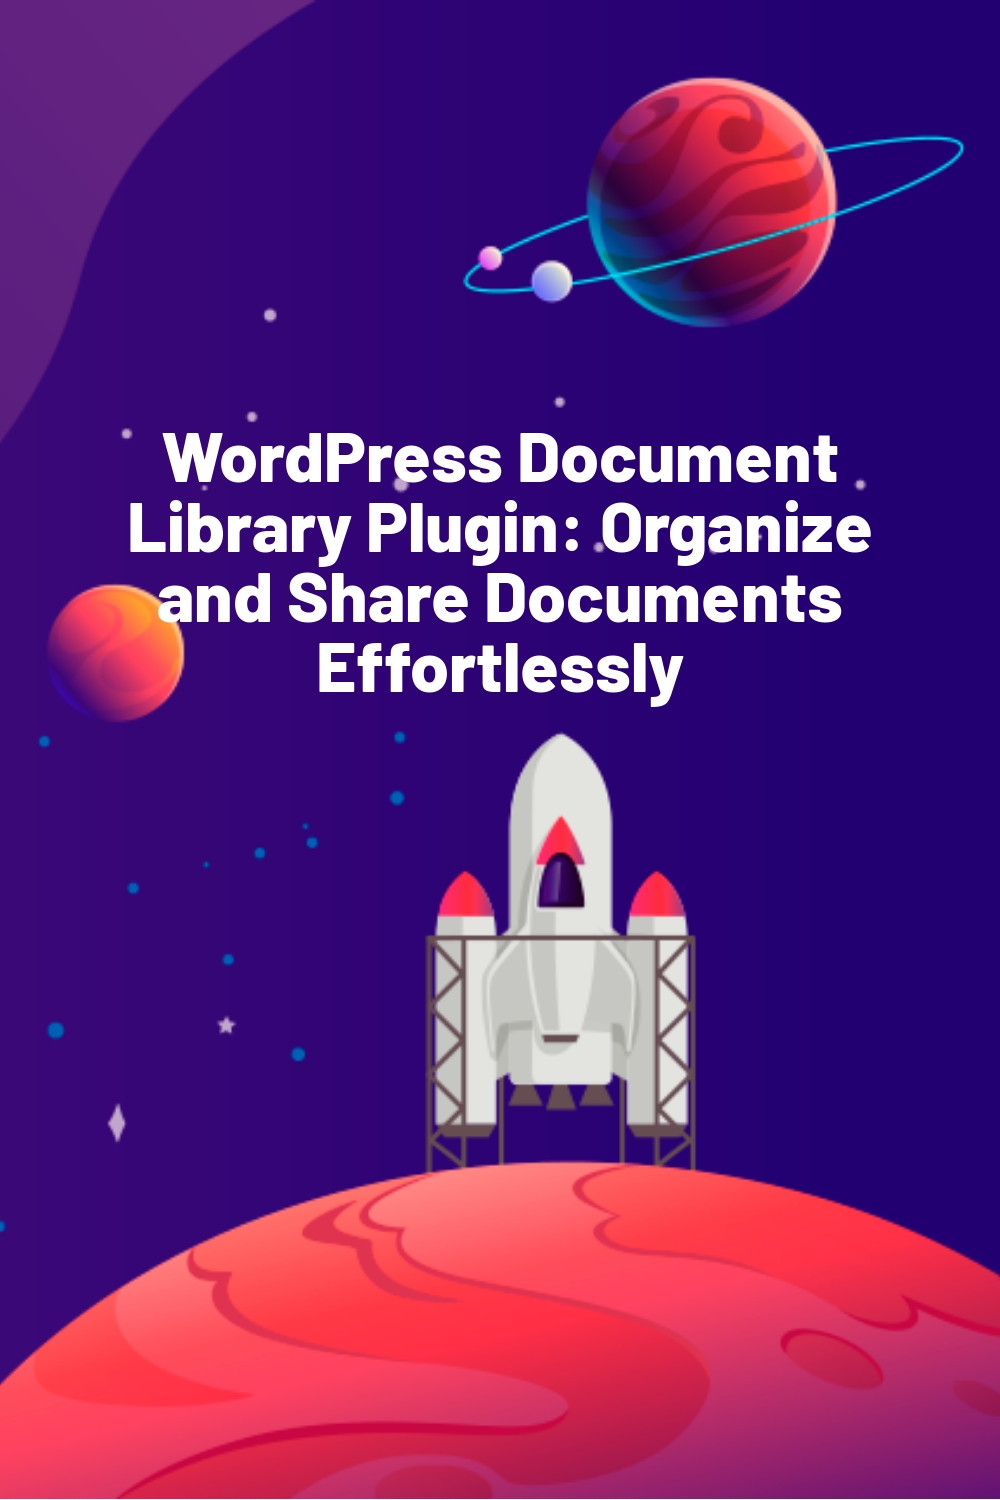 WordPress Document Library Plugin: Organize and Share Documents Effortlessly